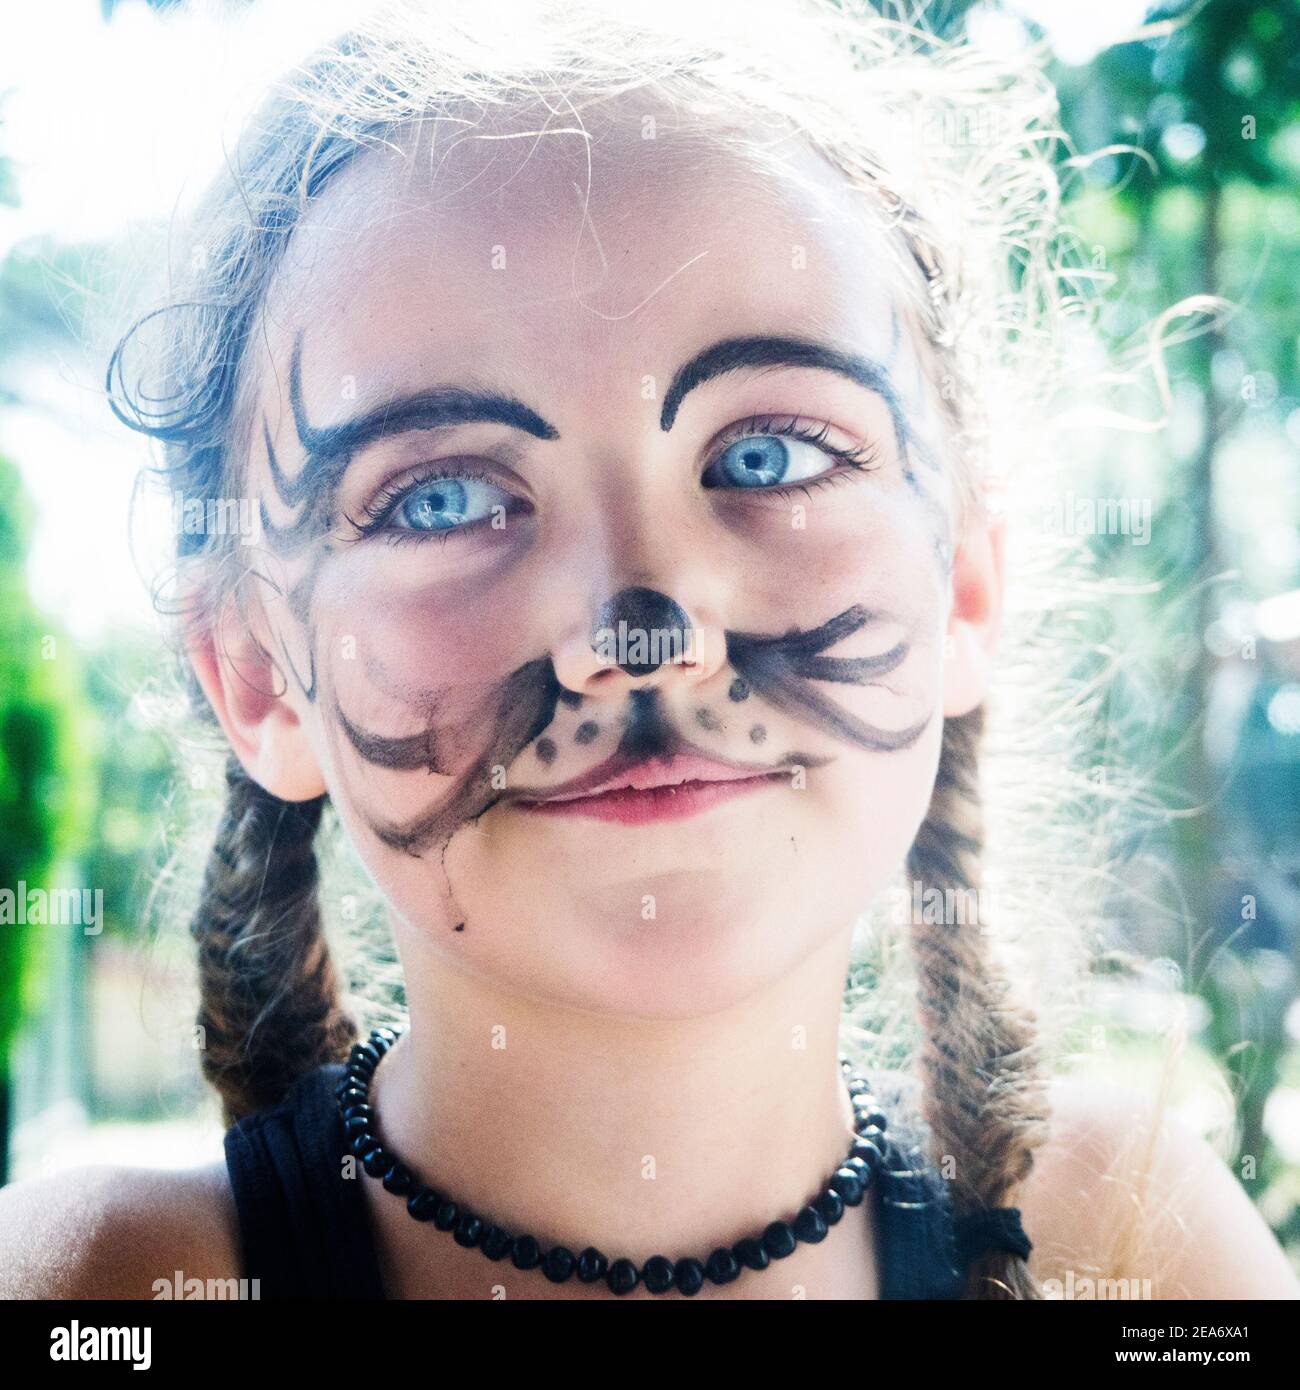 Close-up portrait of a smiling girl with tiger face paint standing in a garden, Italy Stock Photo